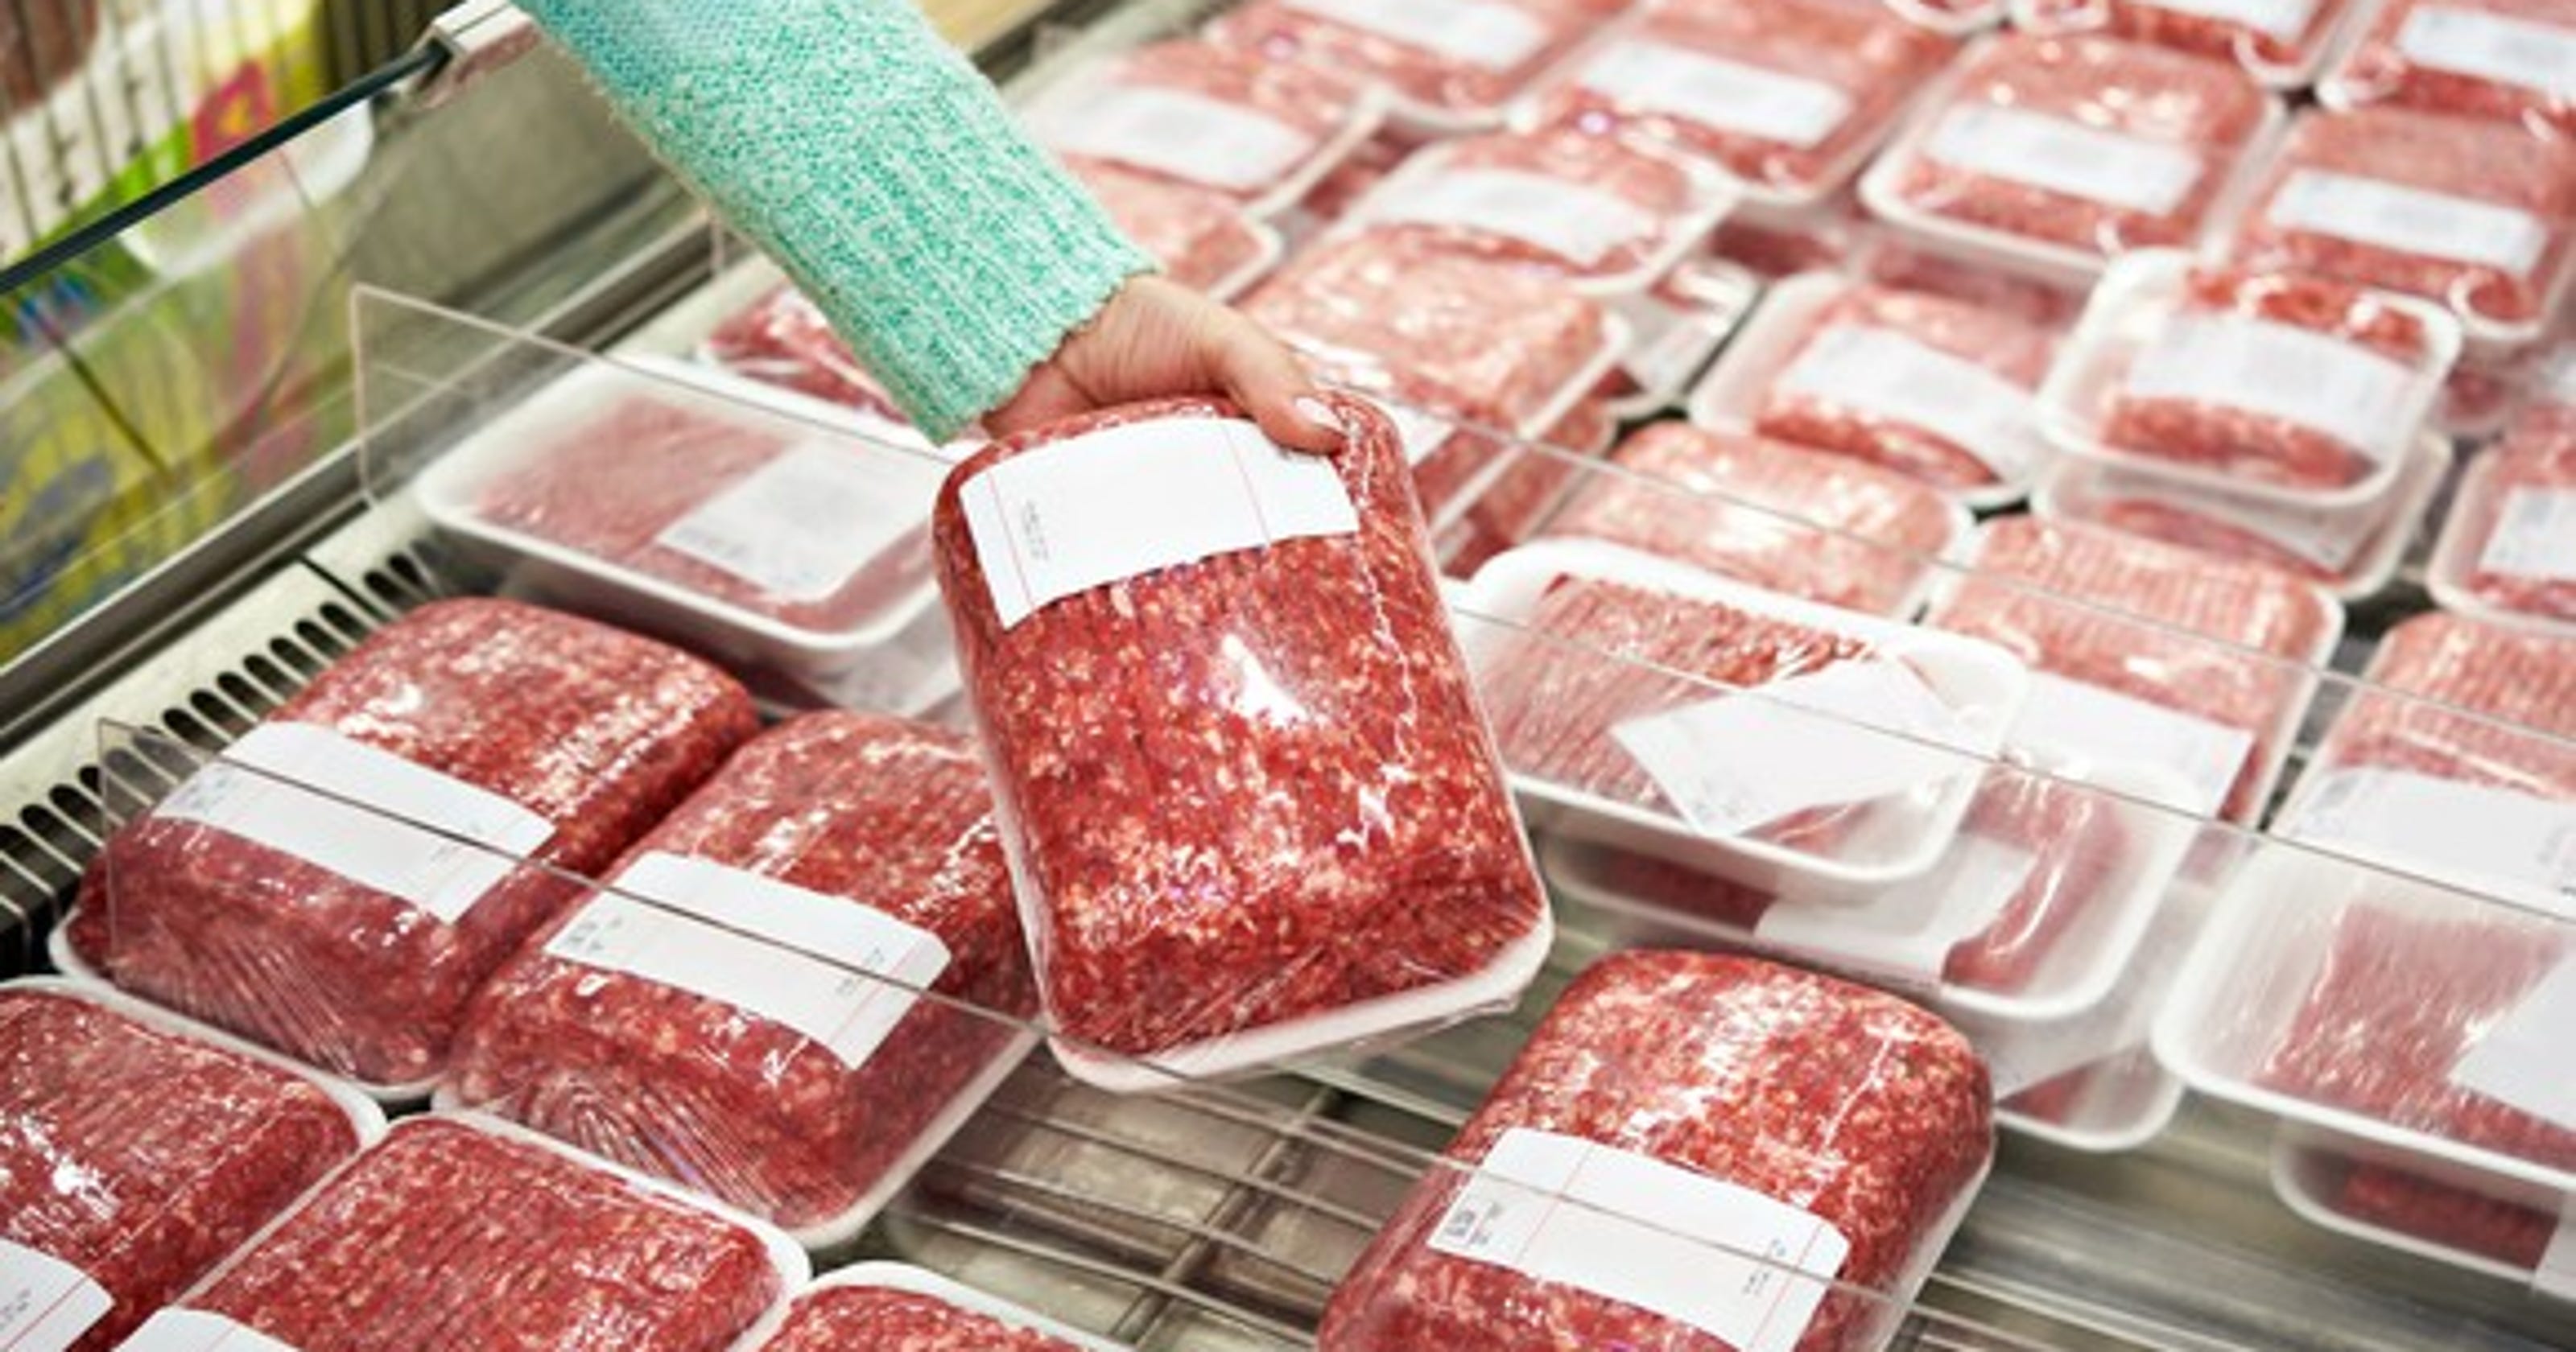 Huge recall for ground beef sold at Meijer, Target for E. coli